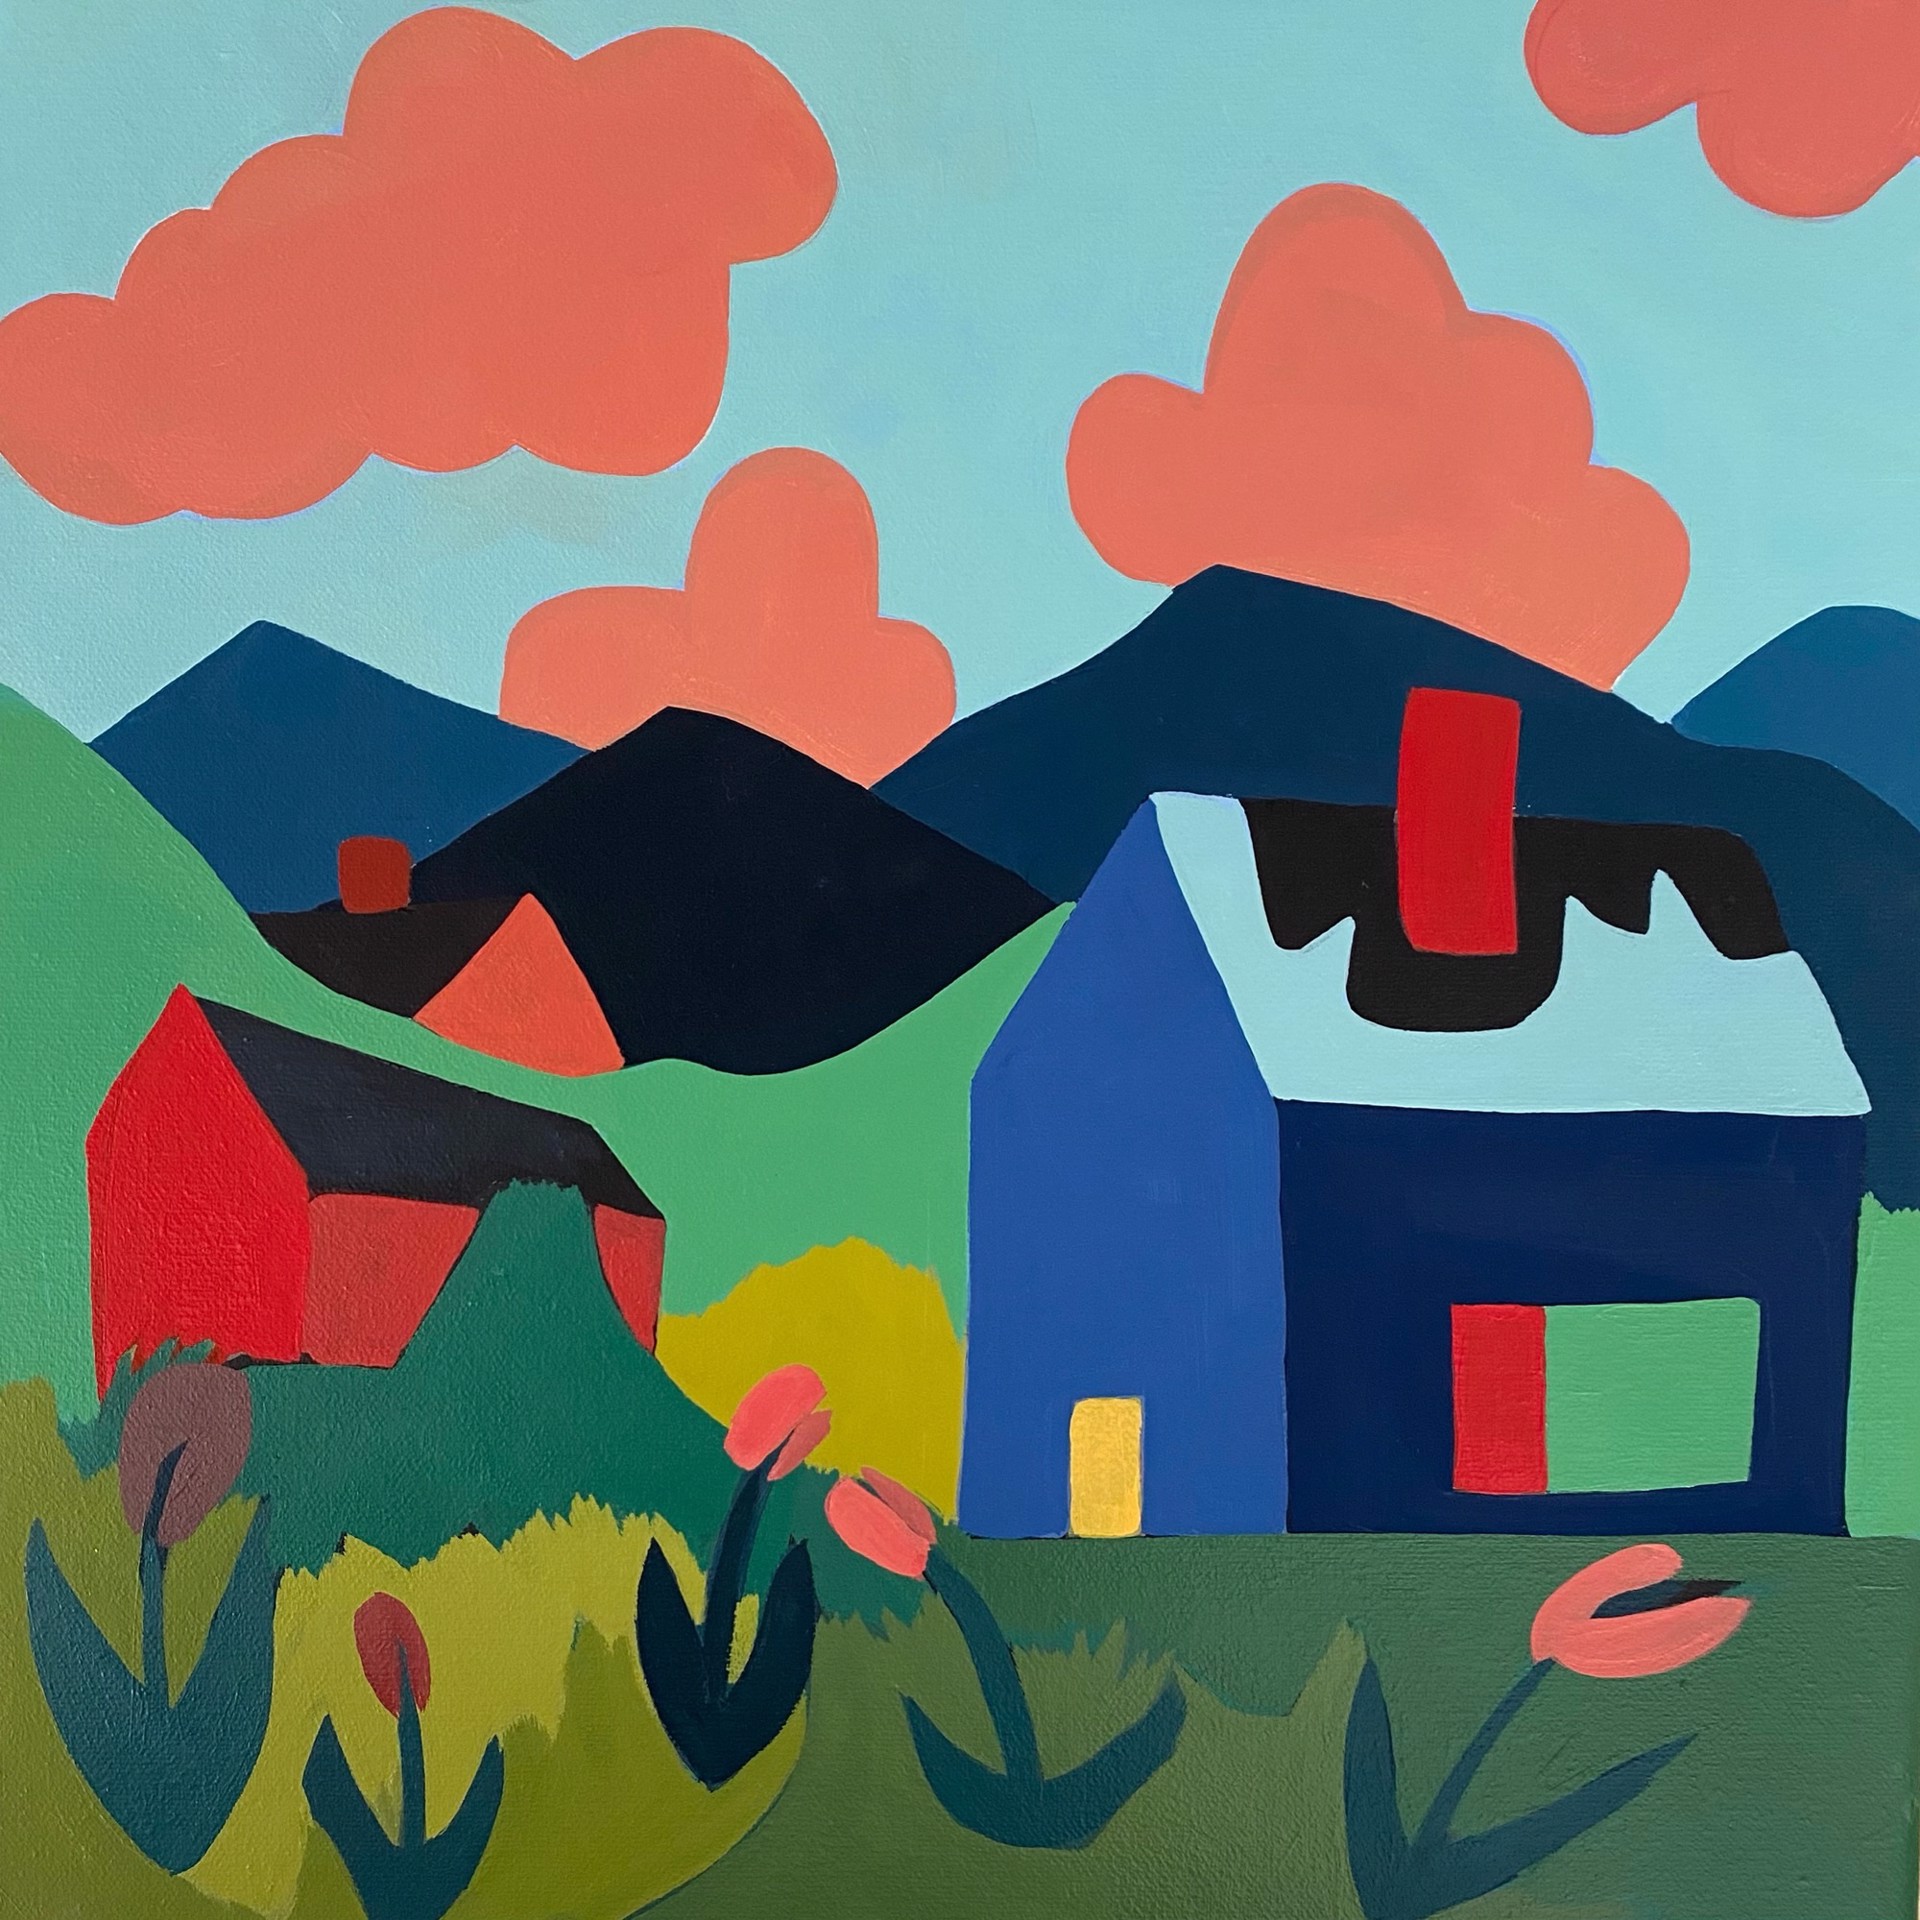 Blue House, Red Barn and Pink House with Chimney by Sage Tucker-Ketcham